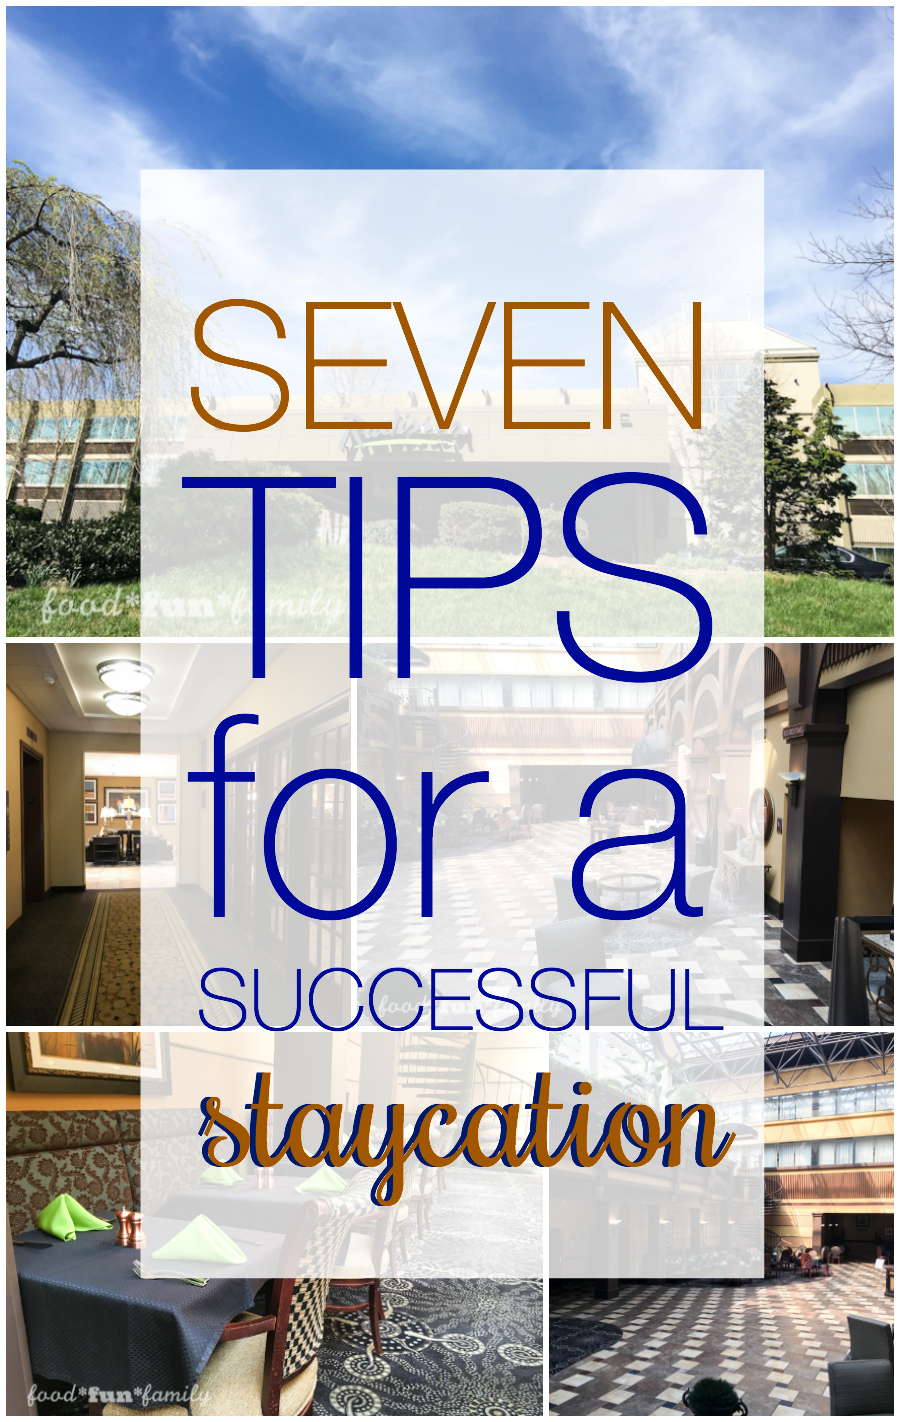 7 tips for a successful staycation - how you can enjoy everything about a "real" vacation without spending as much money or time!